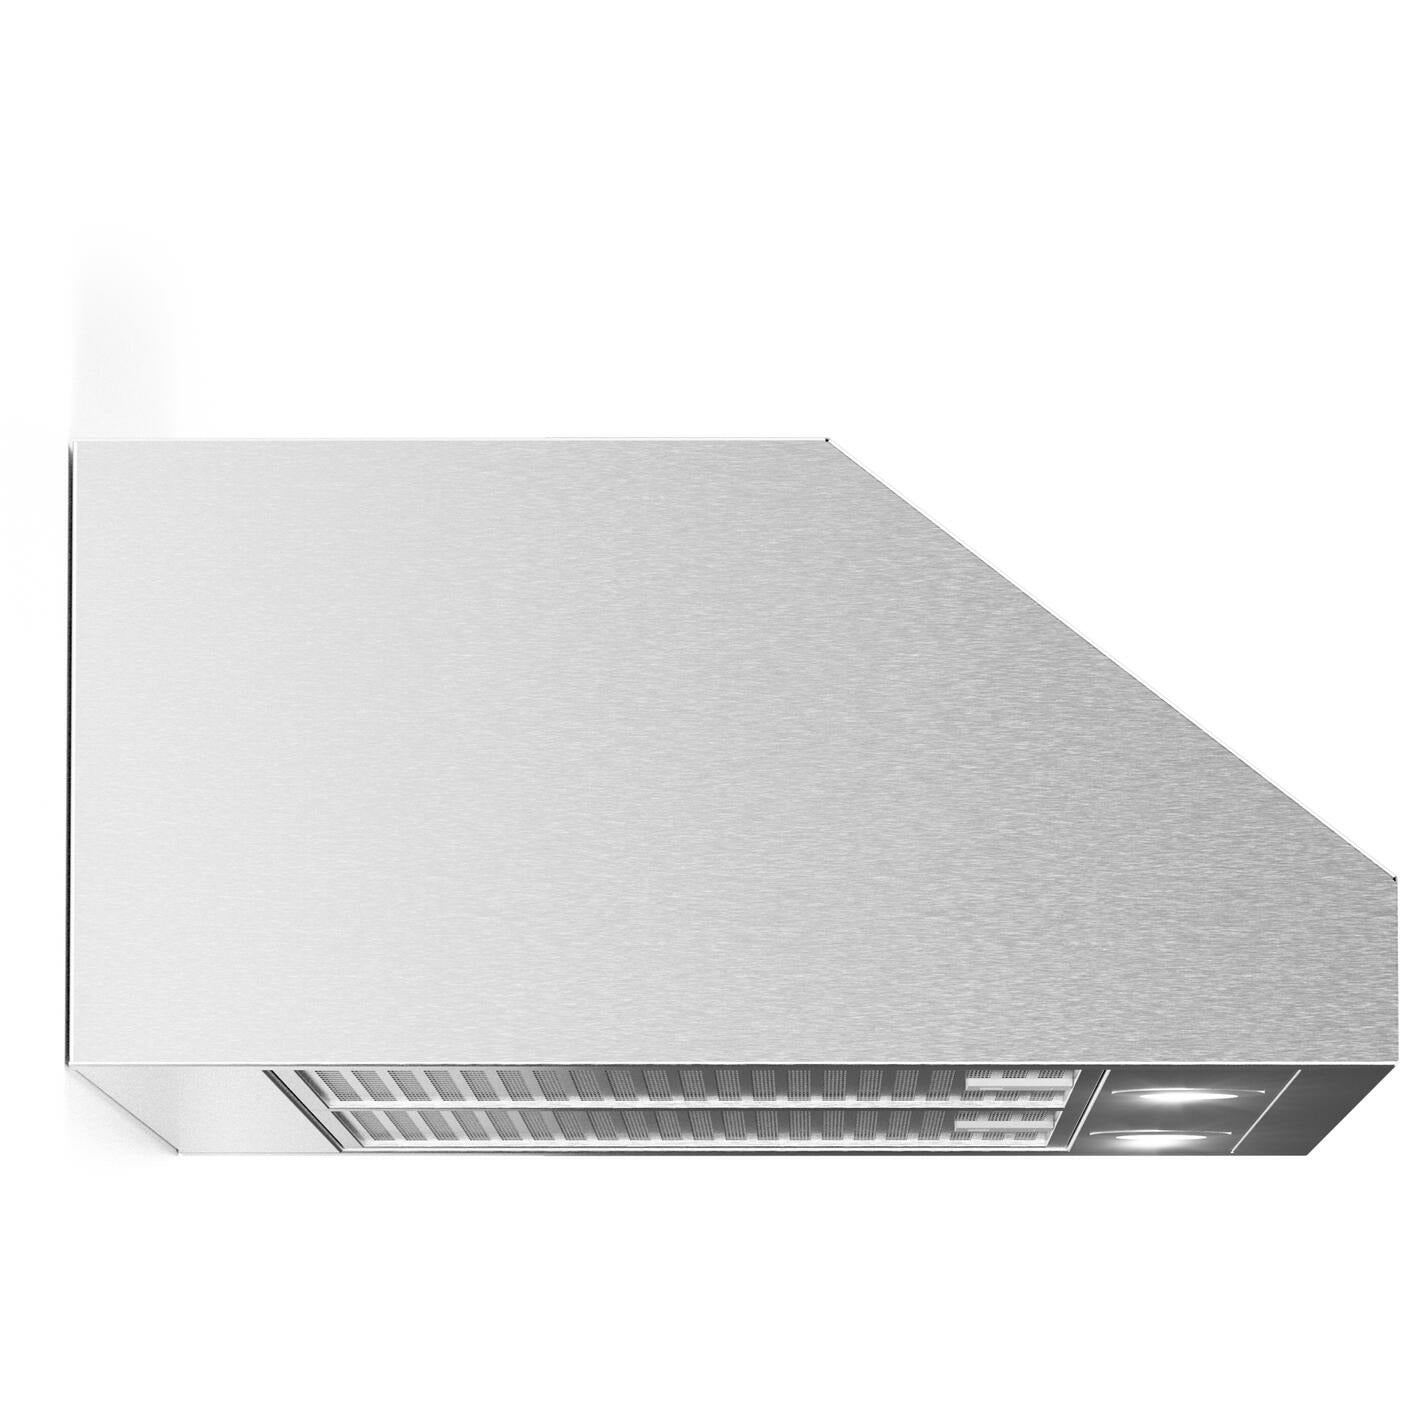 Forte Lucca Series 36 Inch Under Cabinet Convertible Hood -  LUCCA36